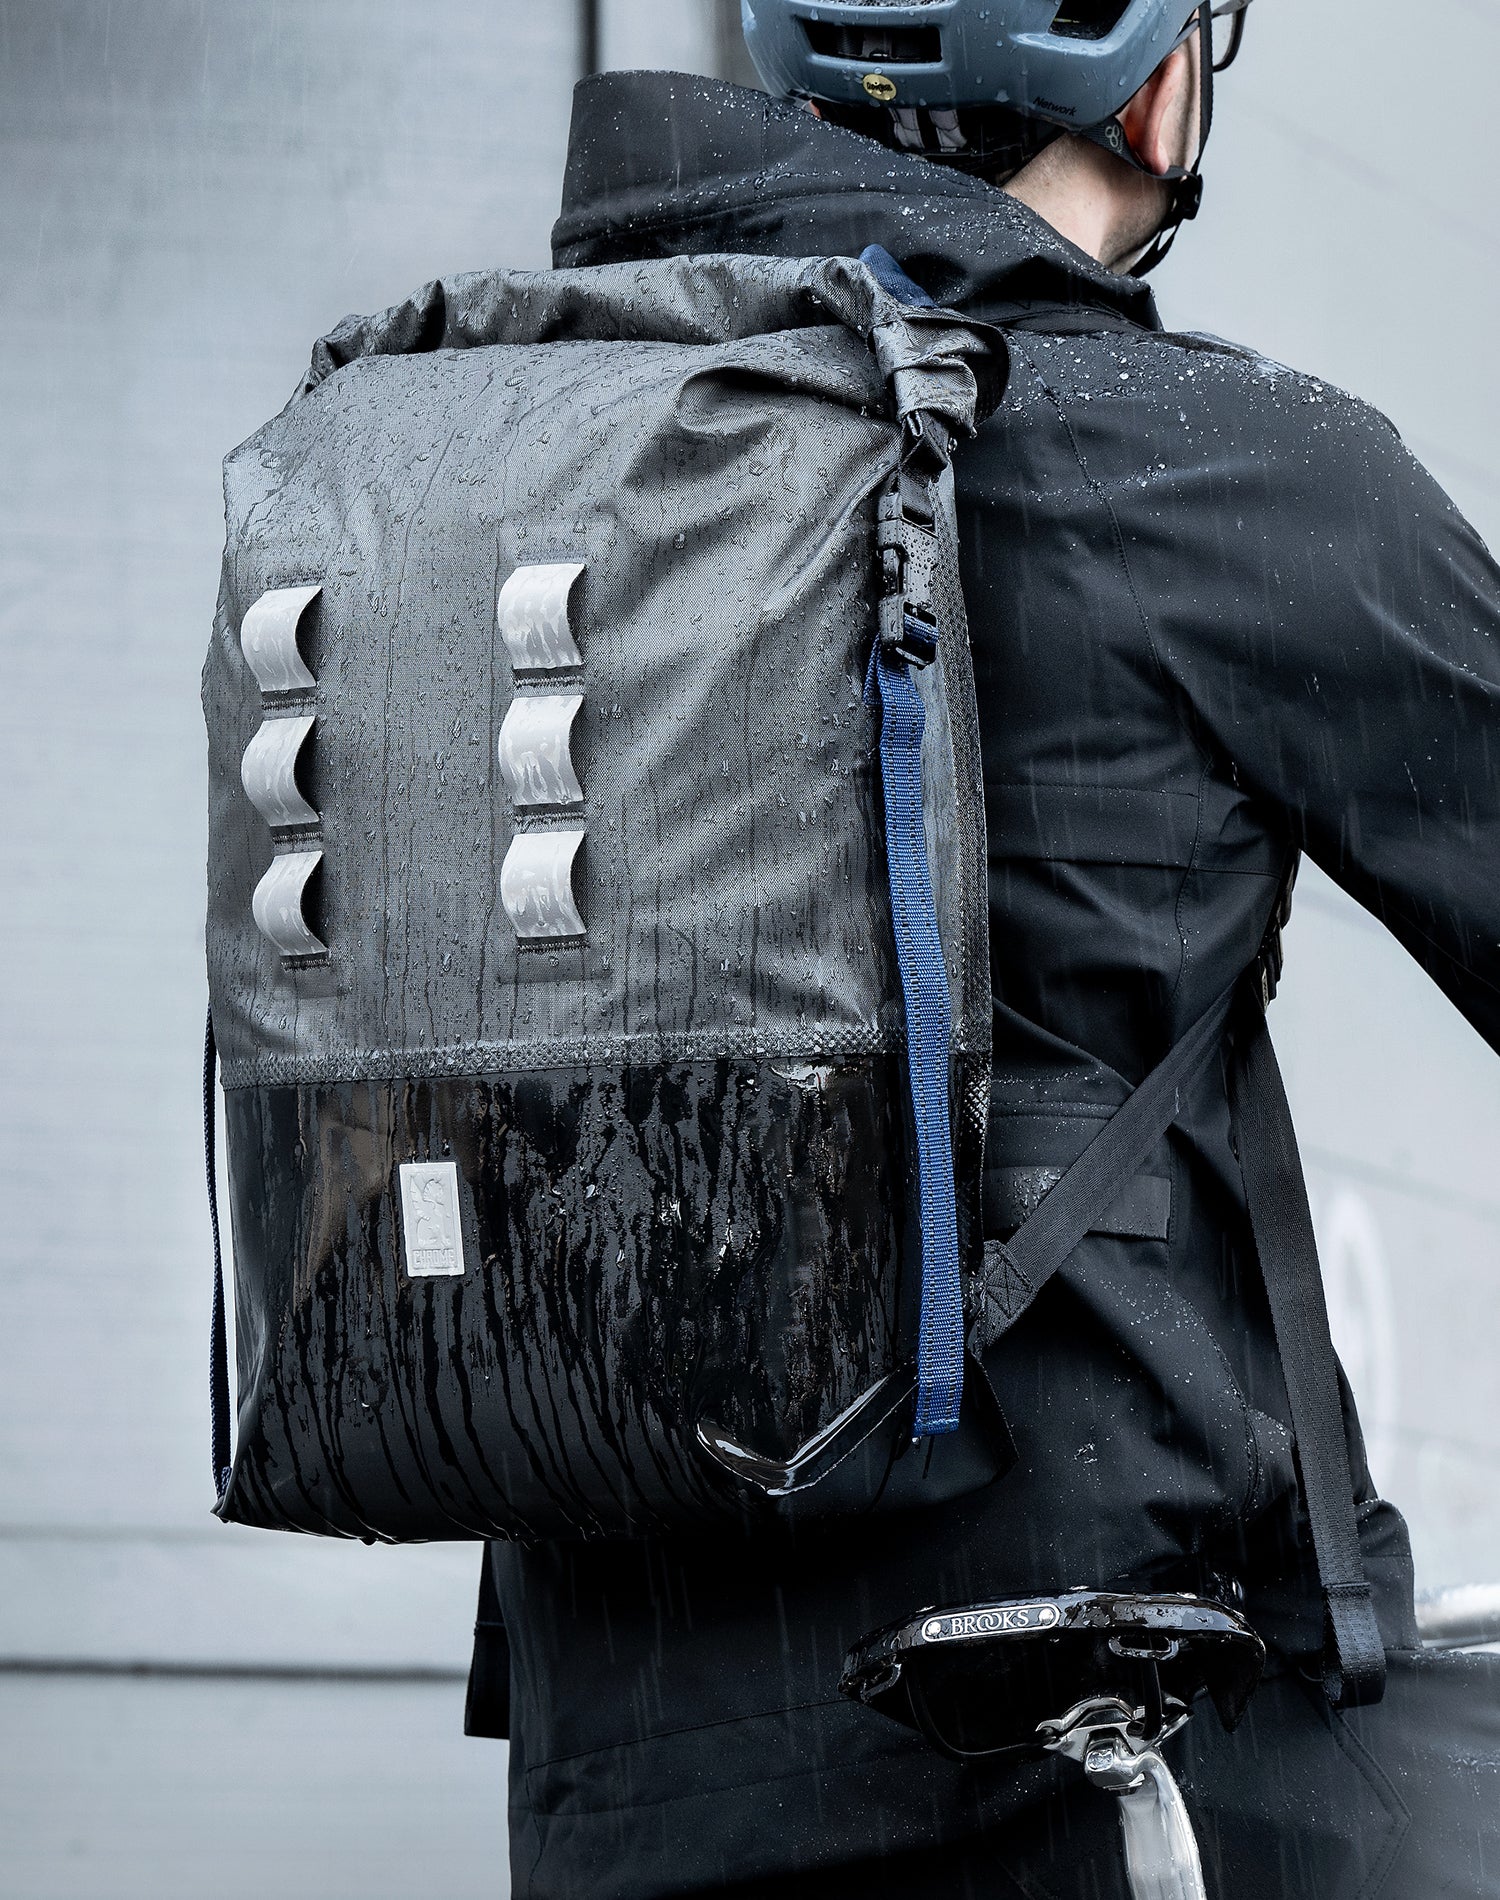 Waterproof Urban Ex bag on a guy riding a bike in the rain mobile size image